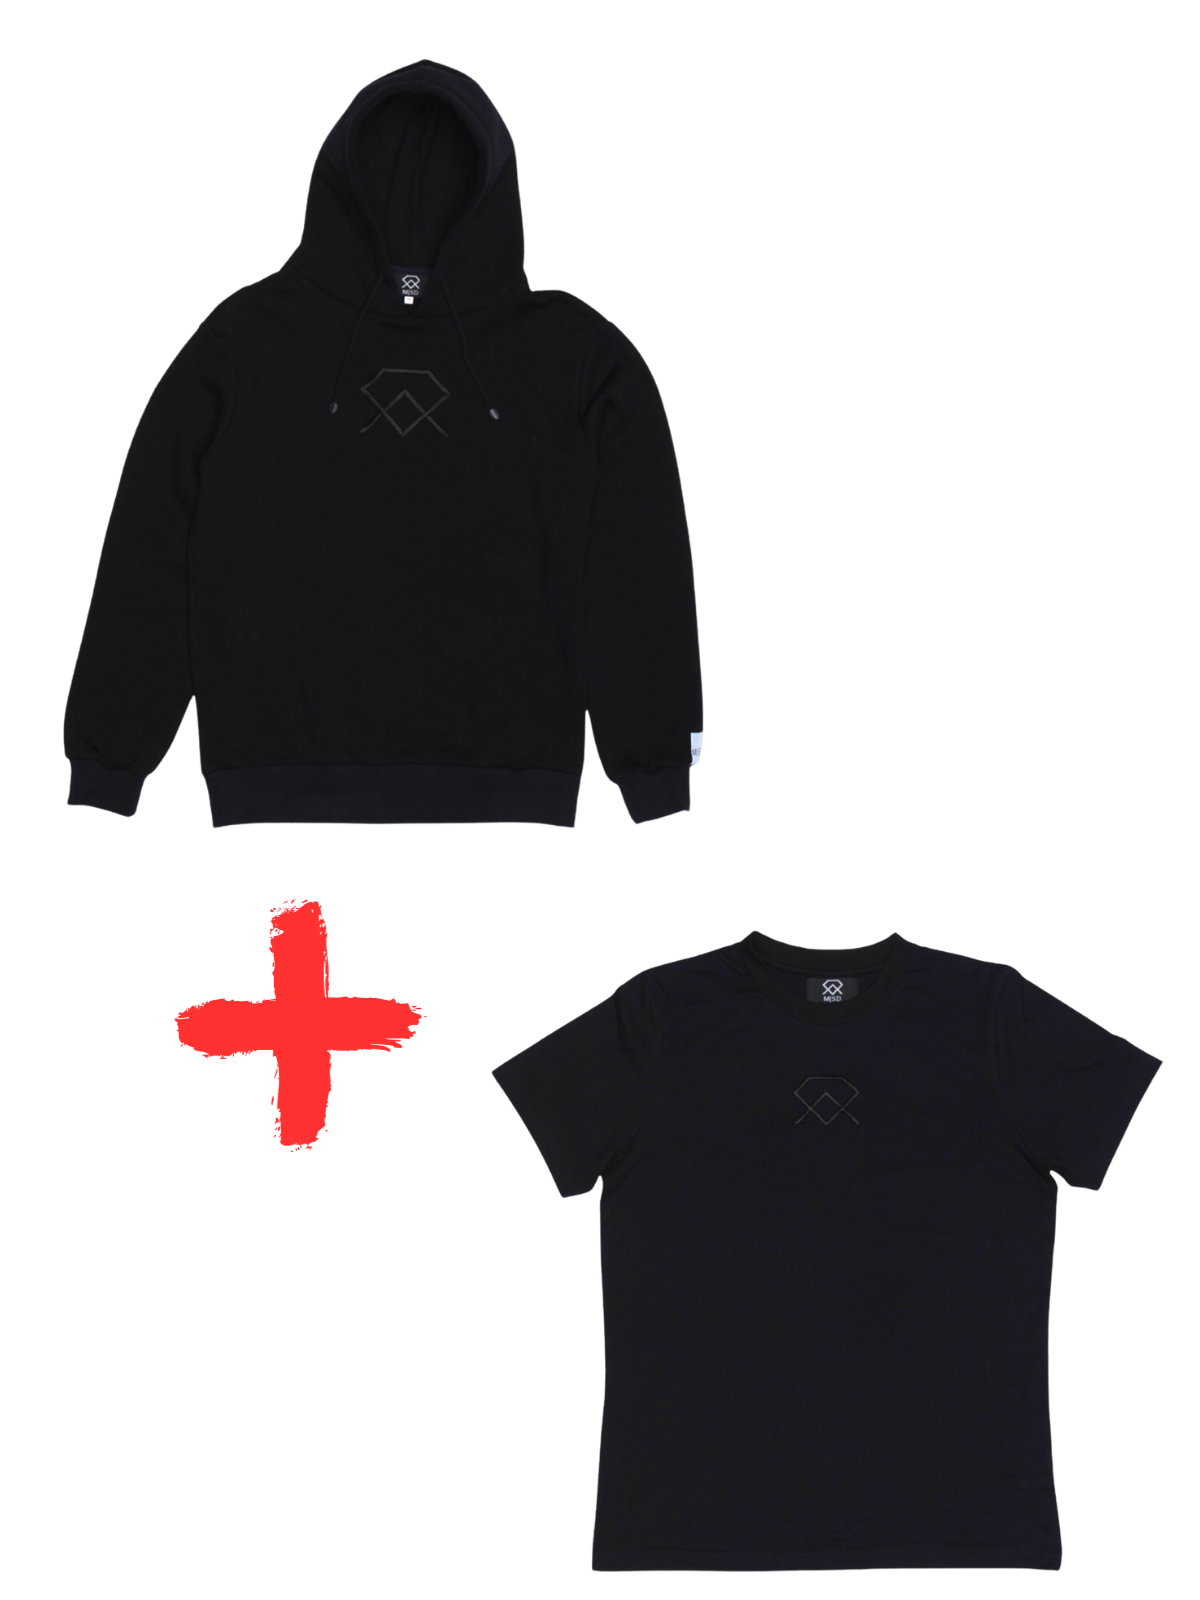 OUTFIT-SET A: HOODIE & T-SHIRT